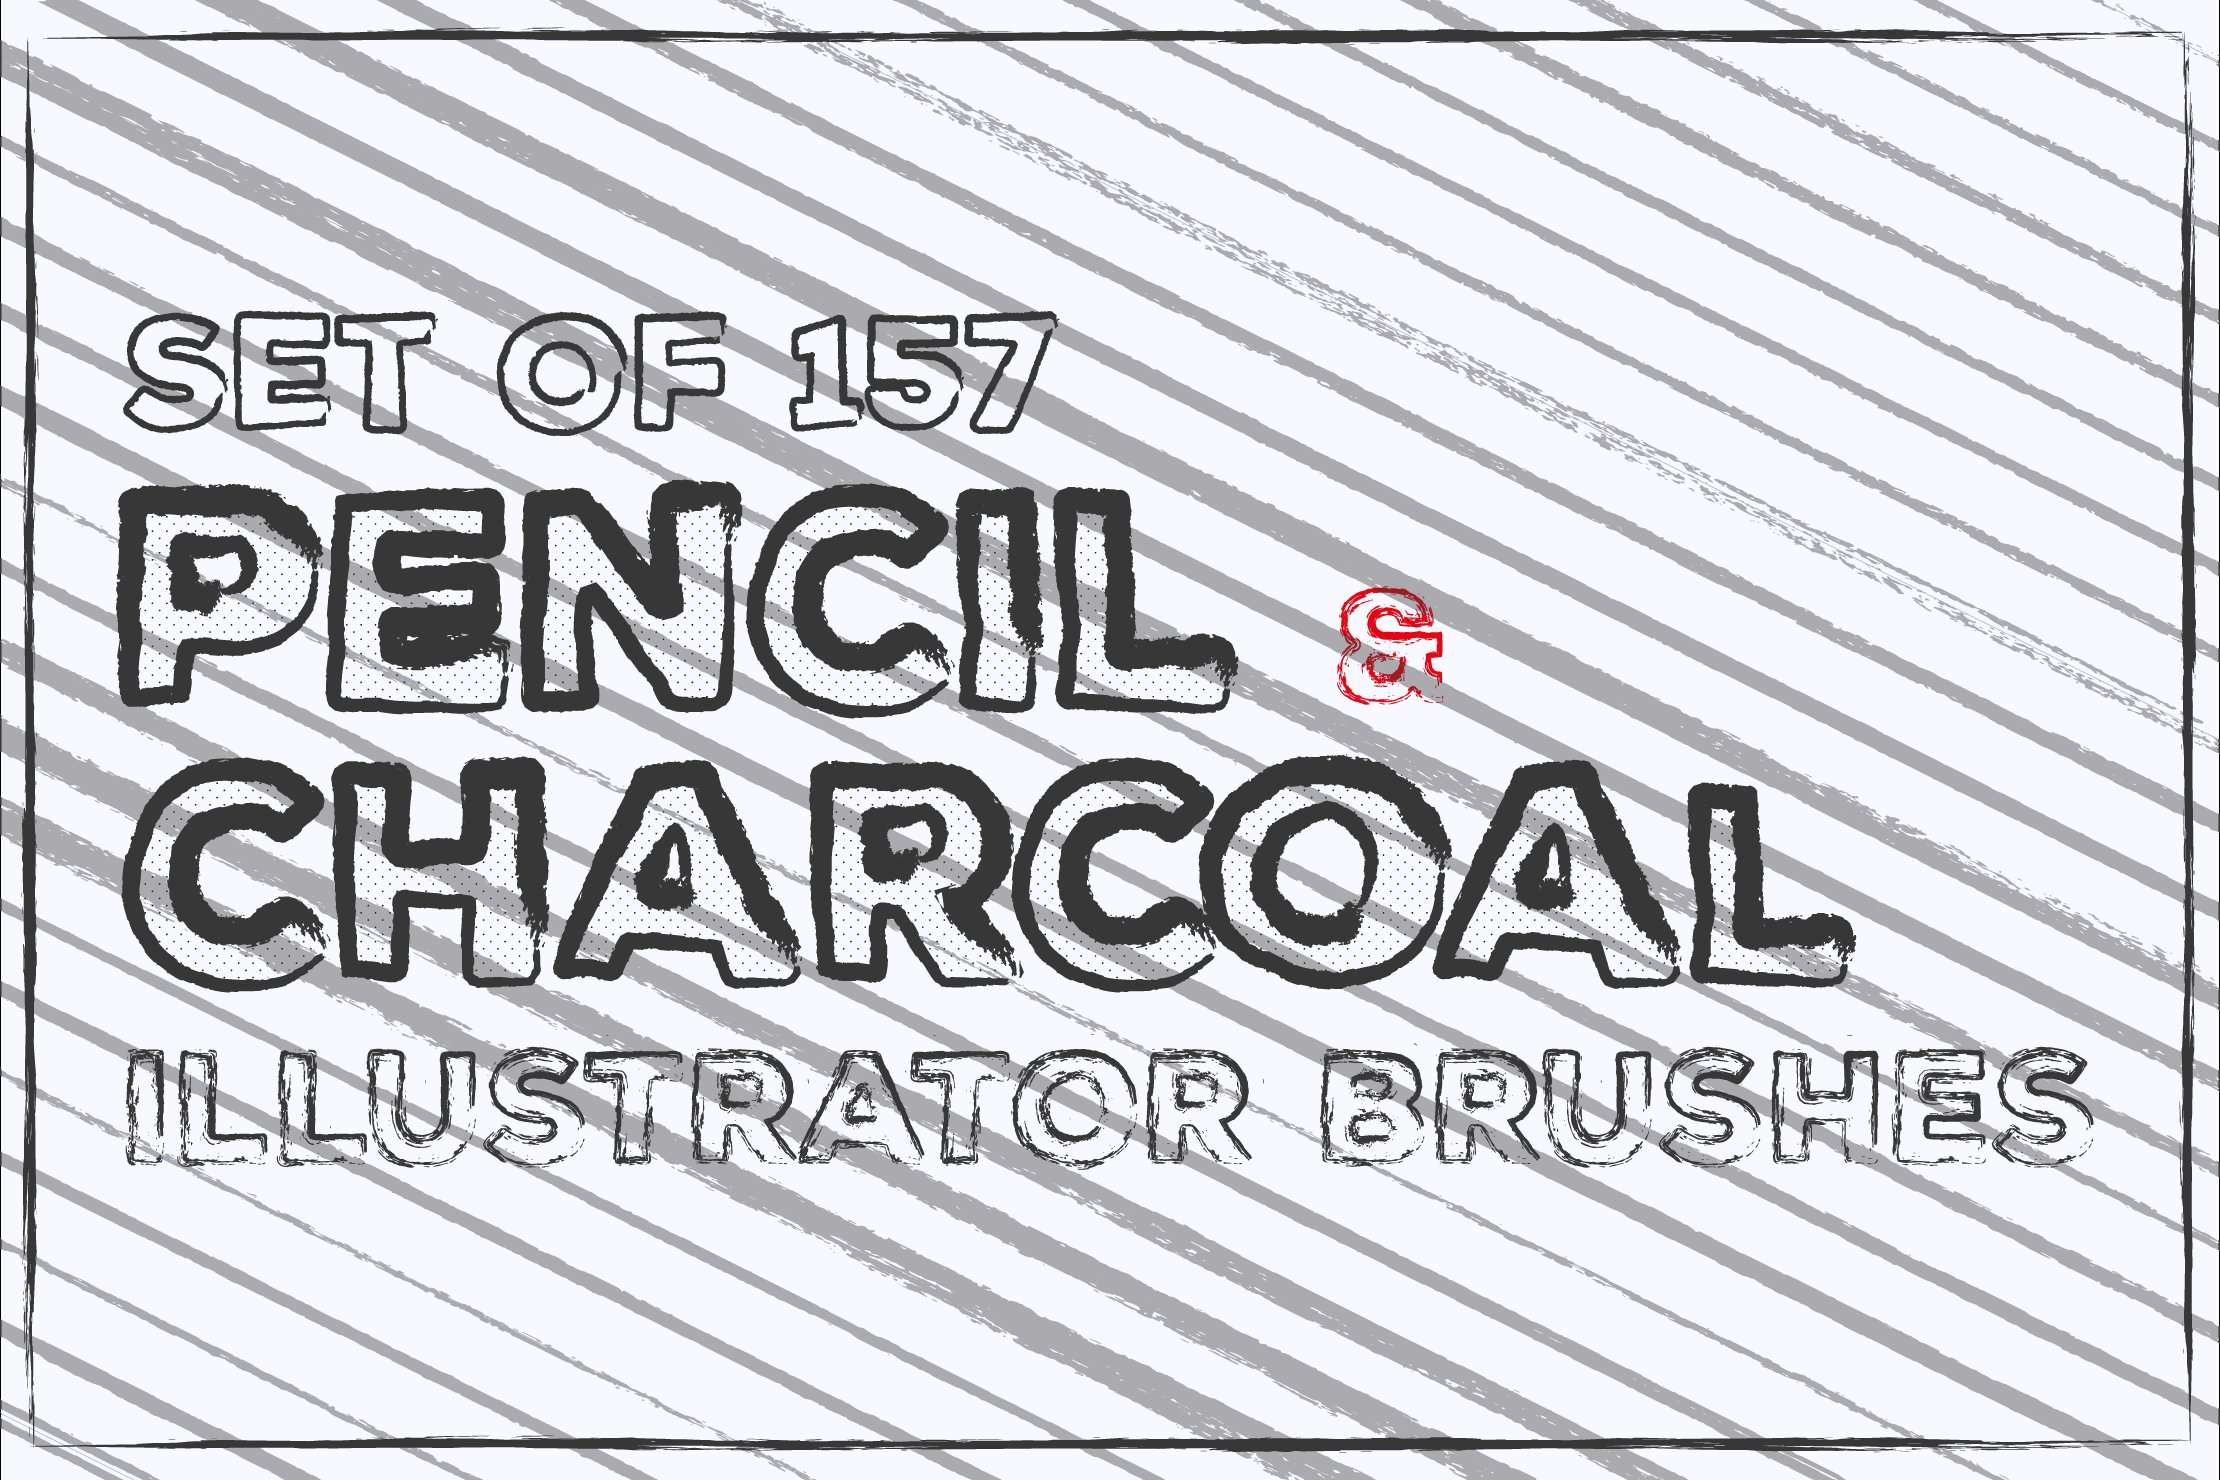 Pencil Charcoal Illustrator Brushes cover image.